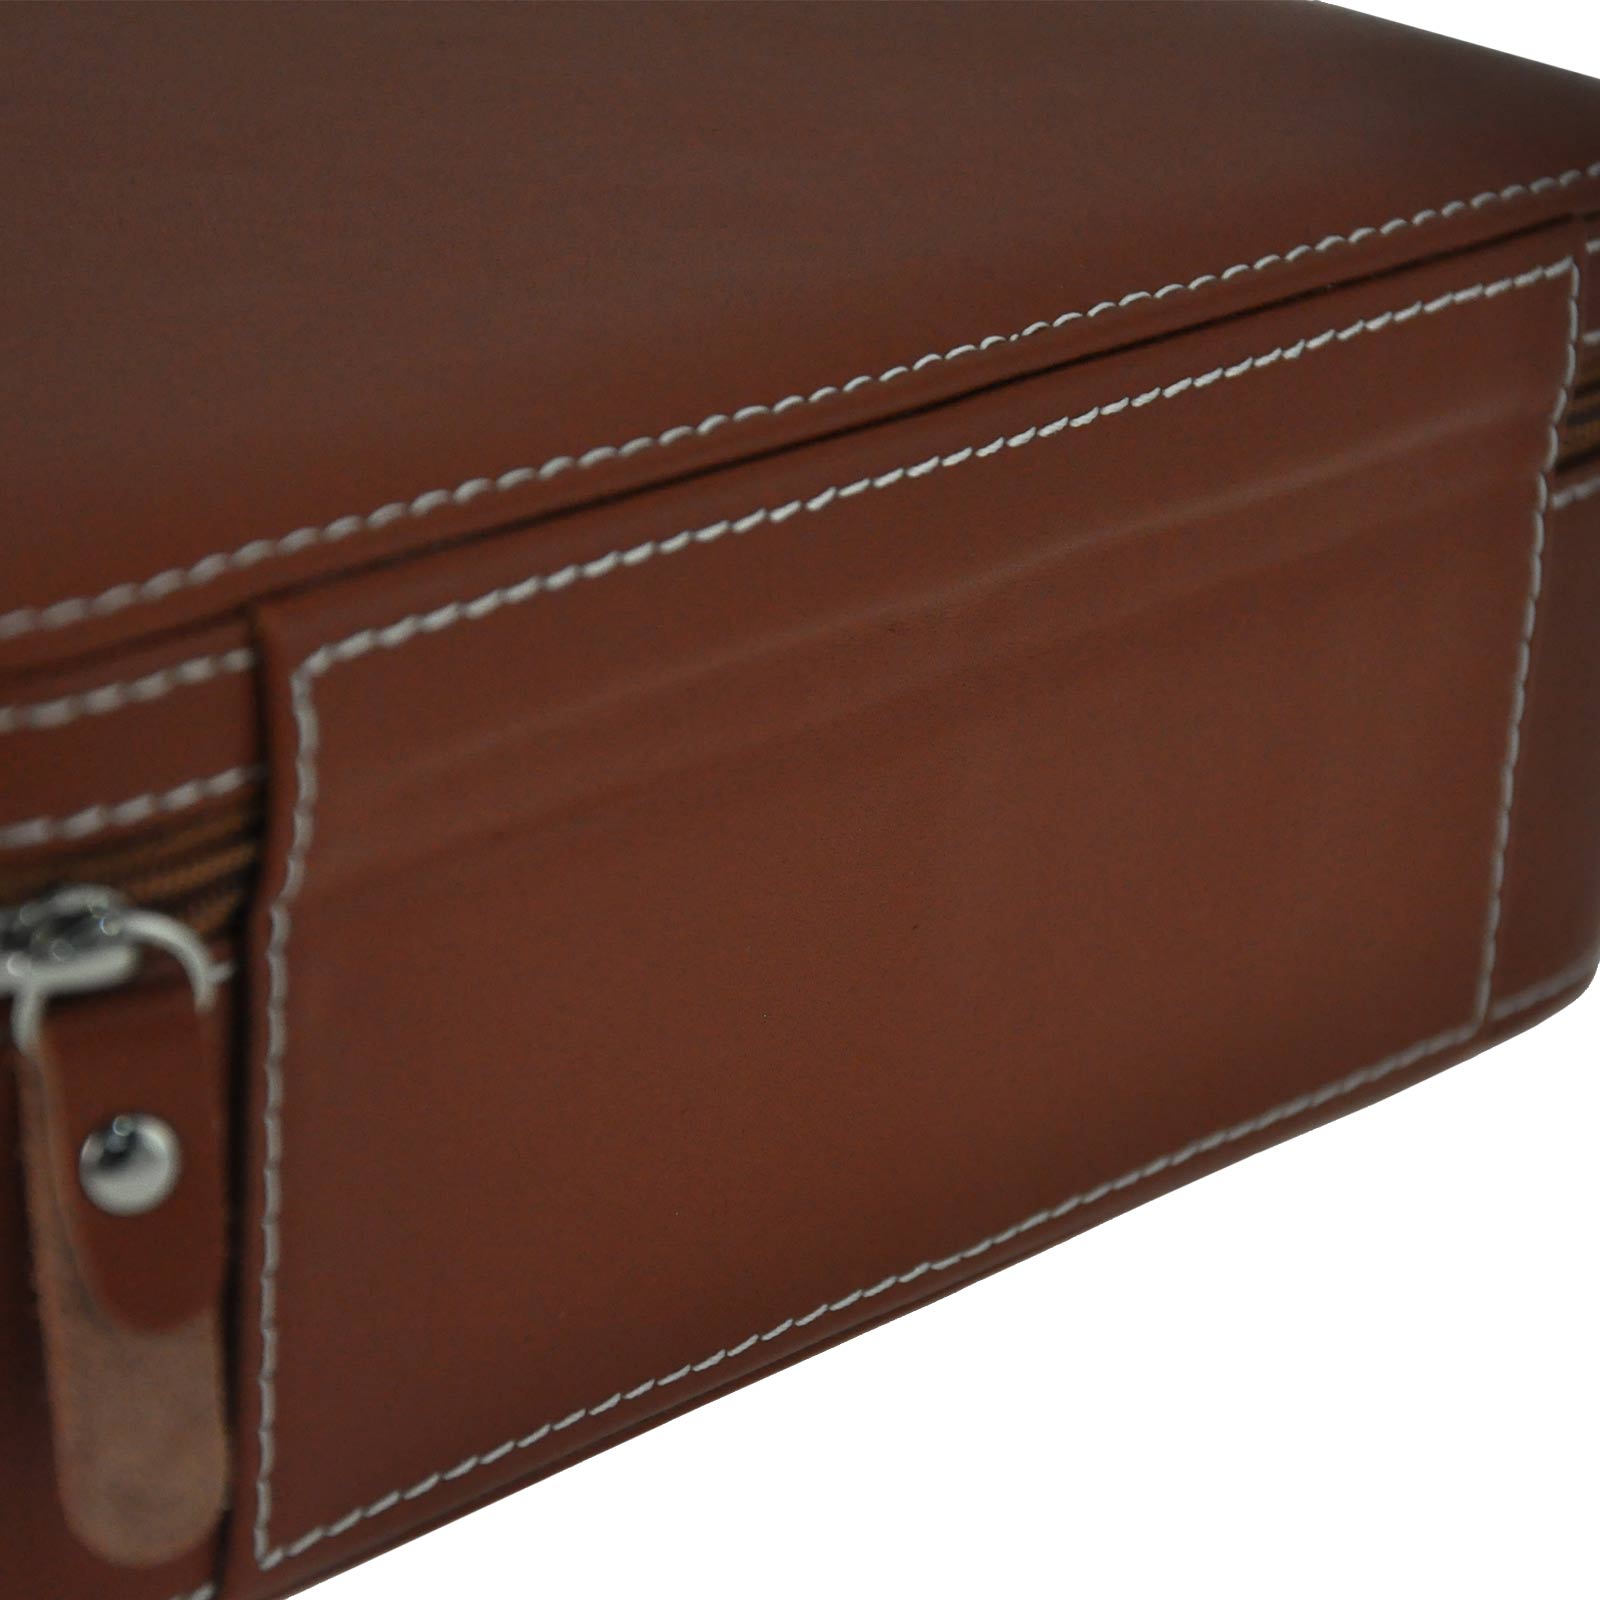 Luxury Travel watch case Genuine top Leather brown